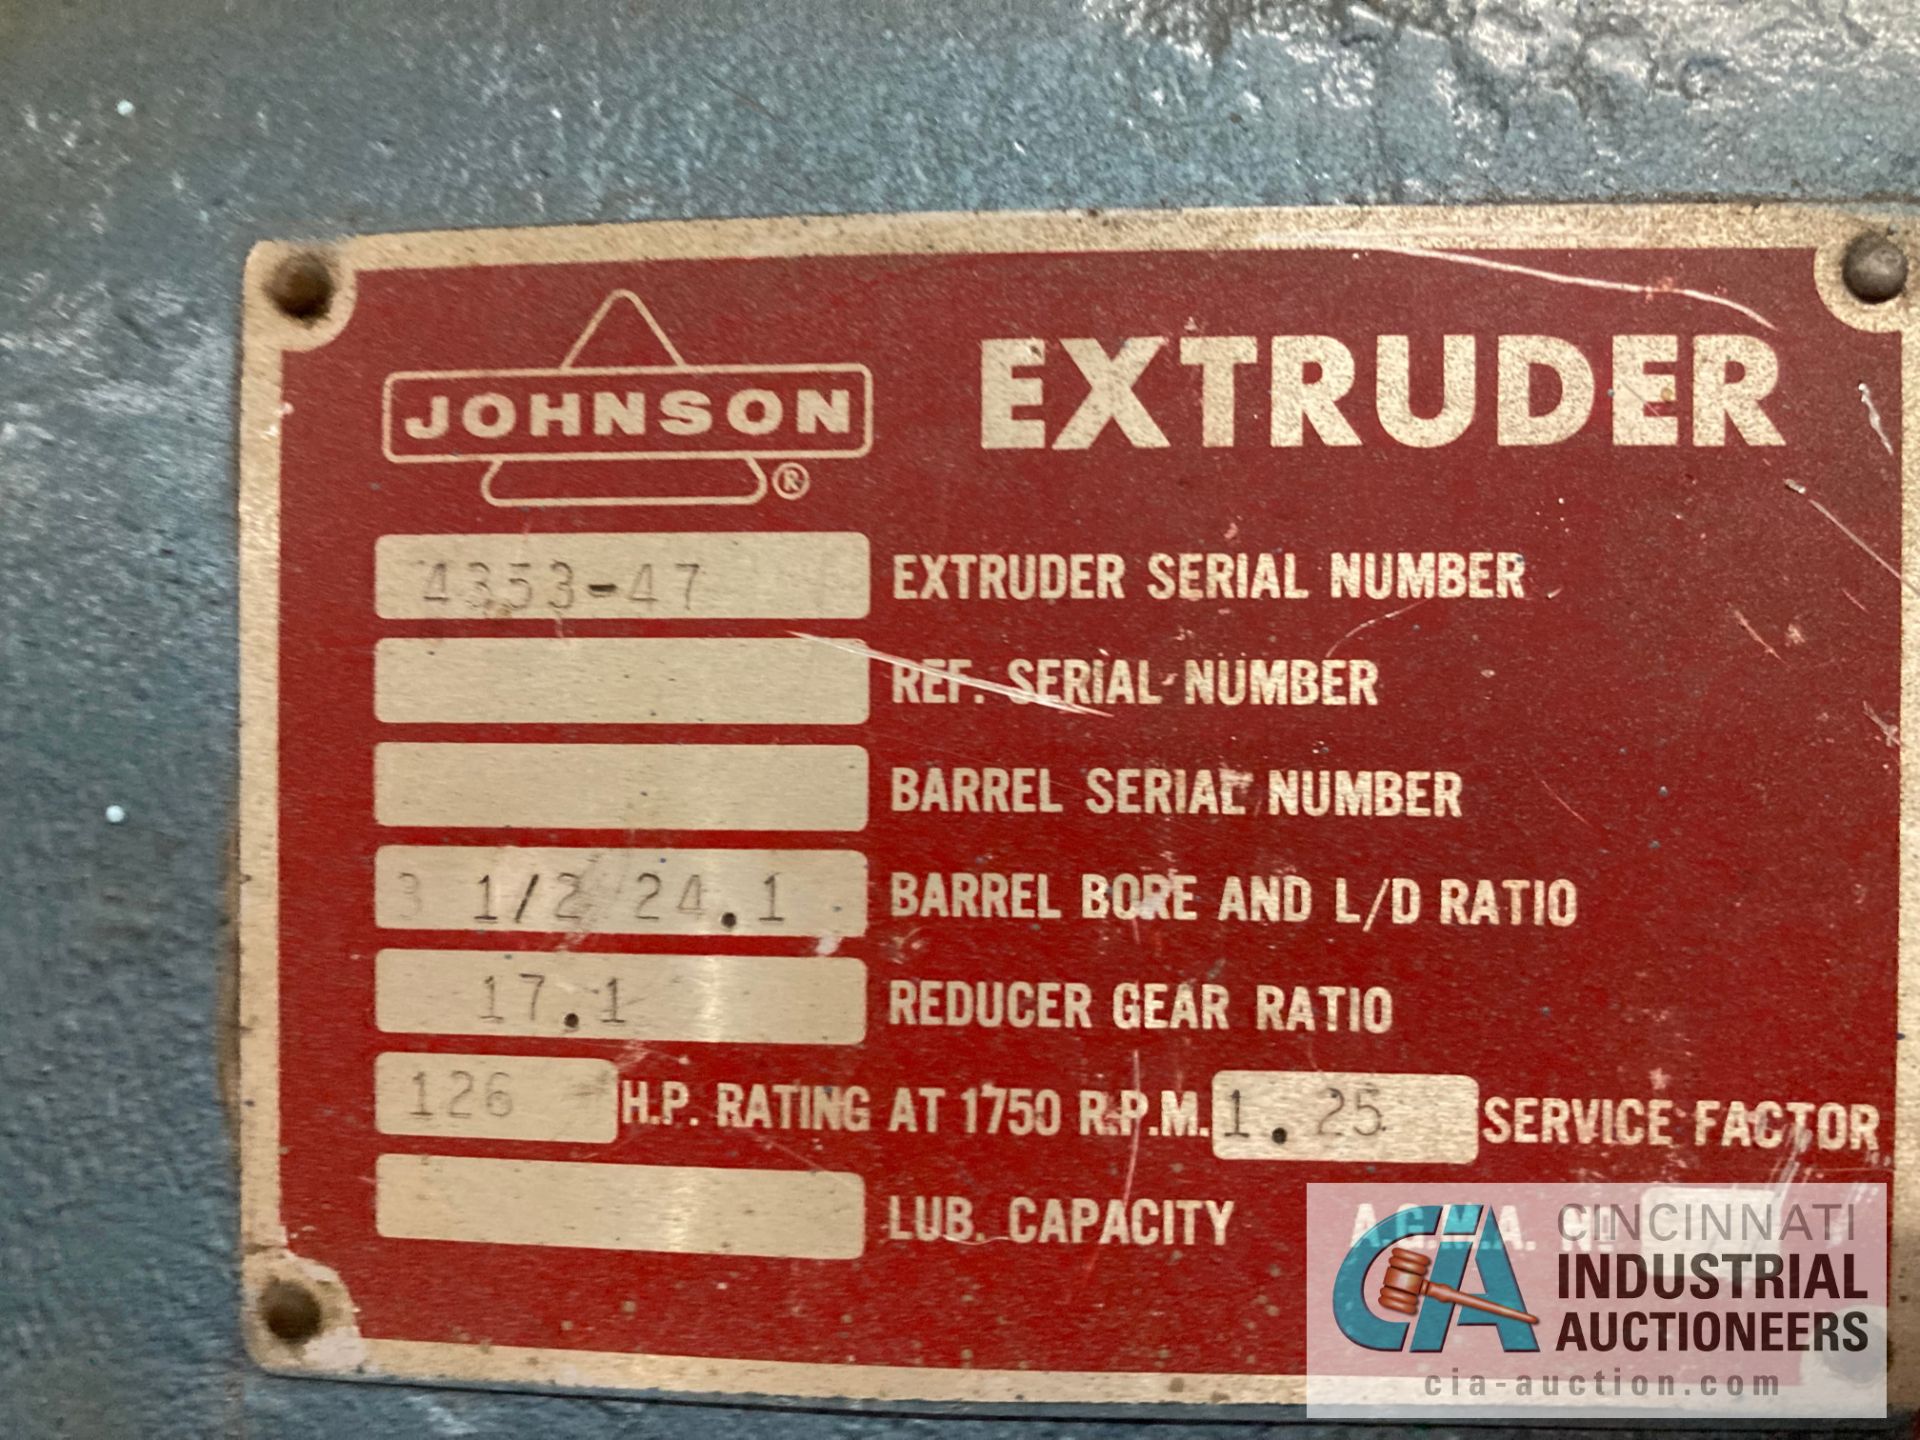 3.5" JOHNSON EXTRUDER; S/N 4353-47, 24.1 L/D VENTED BARREL, 17.1 GEARBOX RATIO, 126 HP MOTOR,1750 - Image 4 of 10